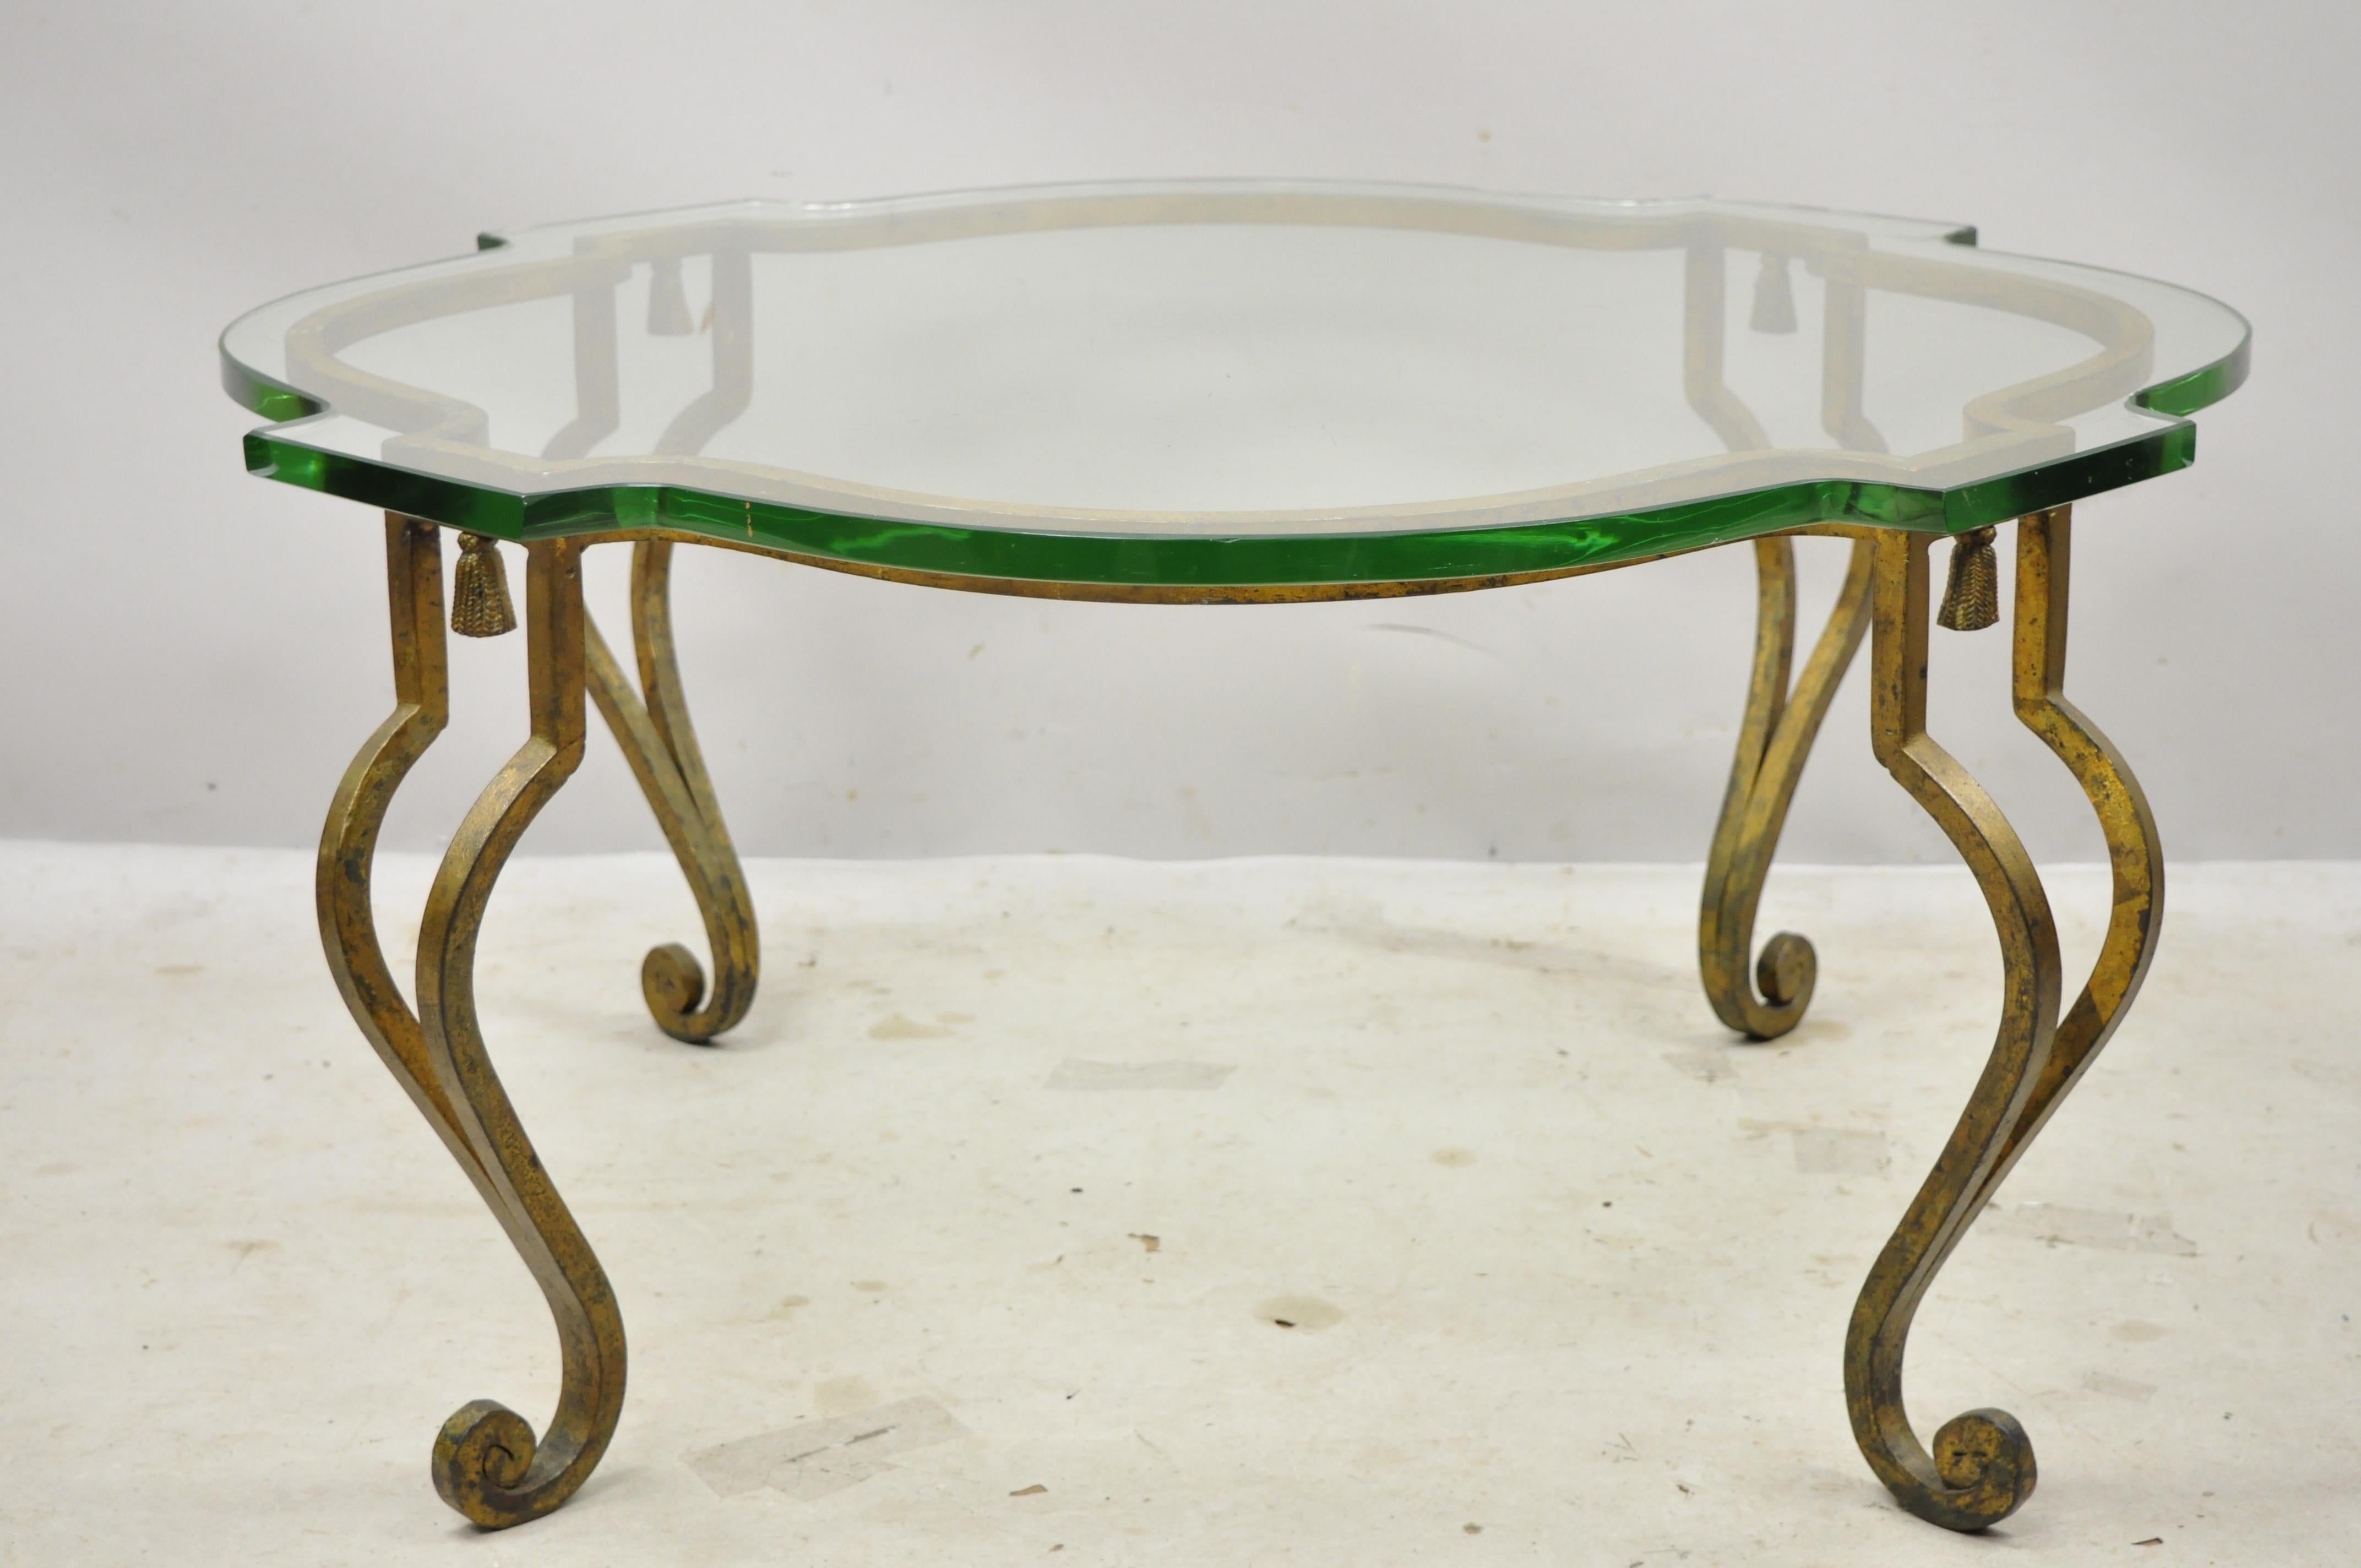 Italian Hollywood Regency distressed gold gilt iron scalloped glass coffee table. Item features heavy iron scrollwork base with tassels, thick scalloped shaped glass top, distressed gold finish, cabriole legs, very nice antique item, great style and